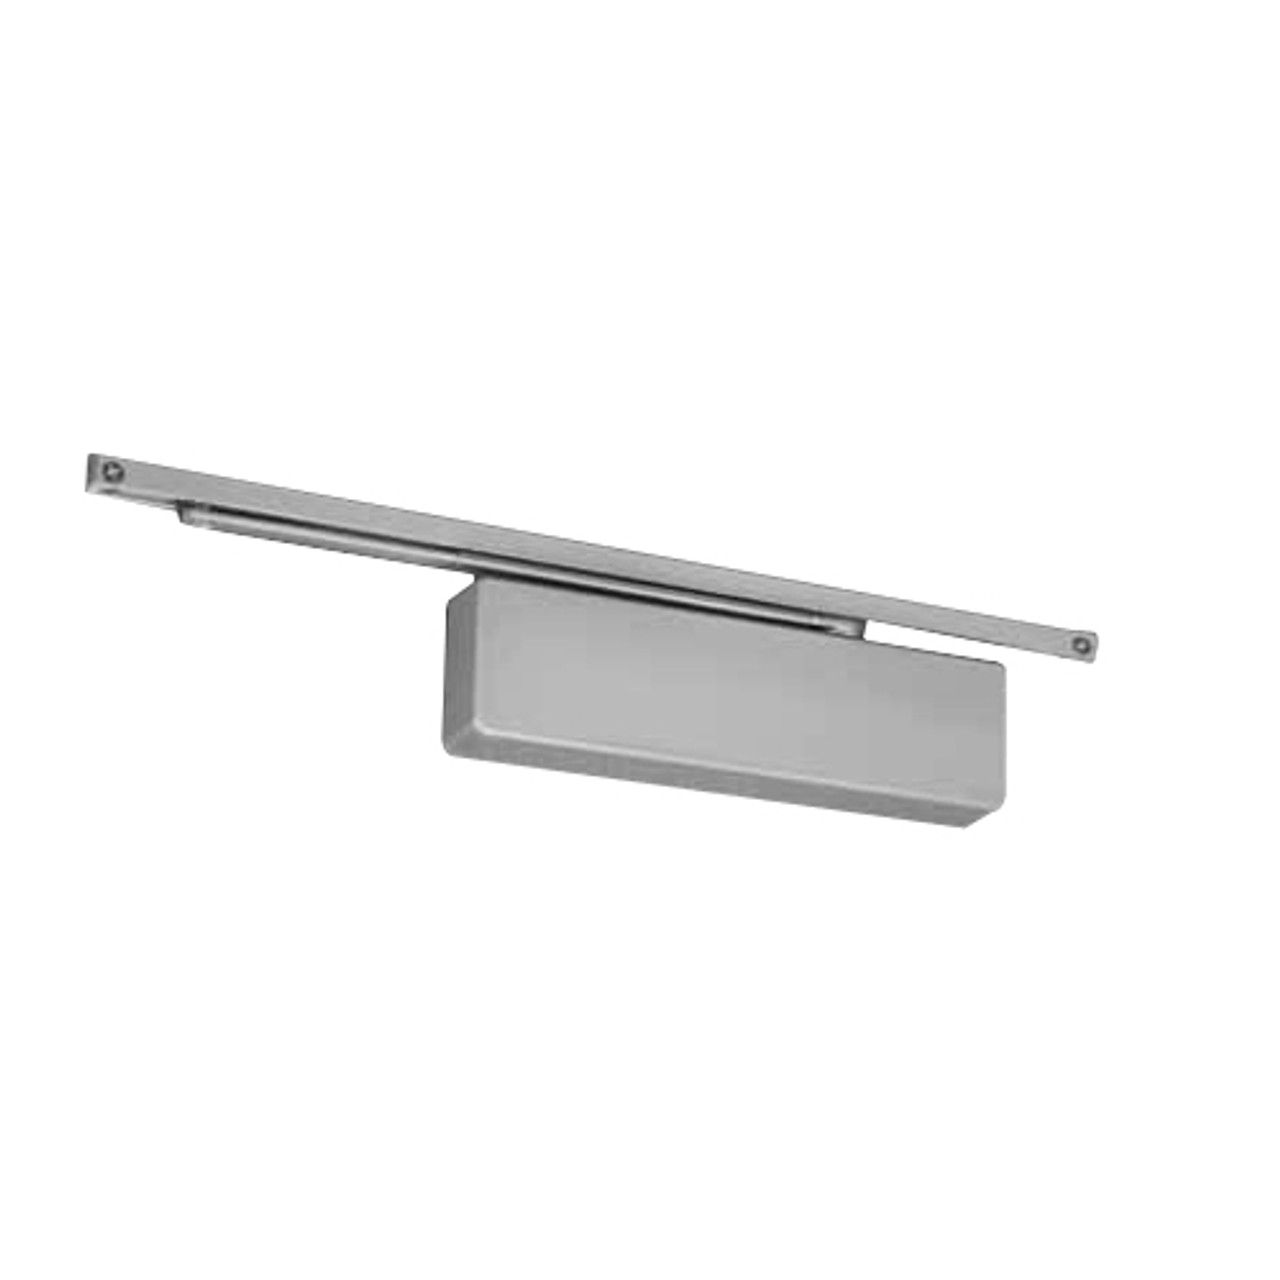 7540ST-689 Norton 7500 Series Non-Hold Open Institutional Door Closer with Pull Side Low Profile Slide Track in Aluminum Finish